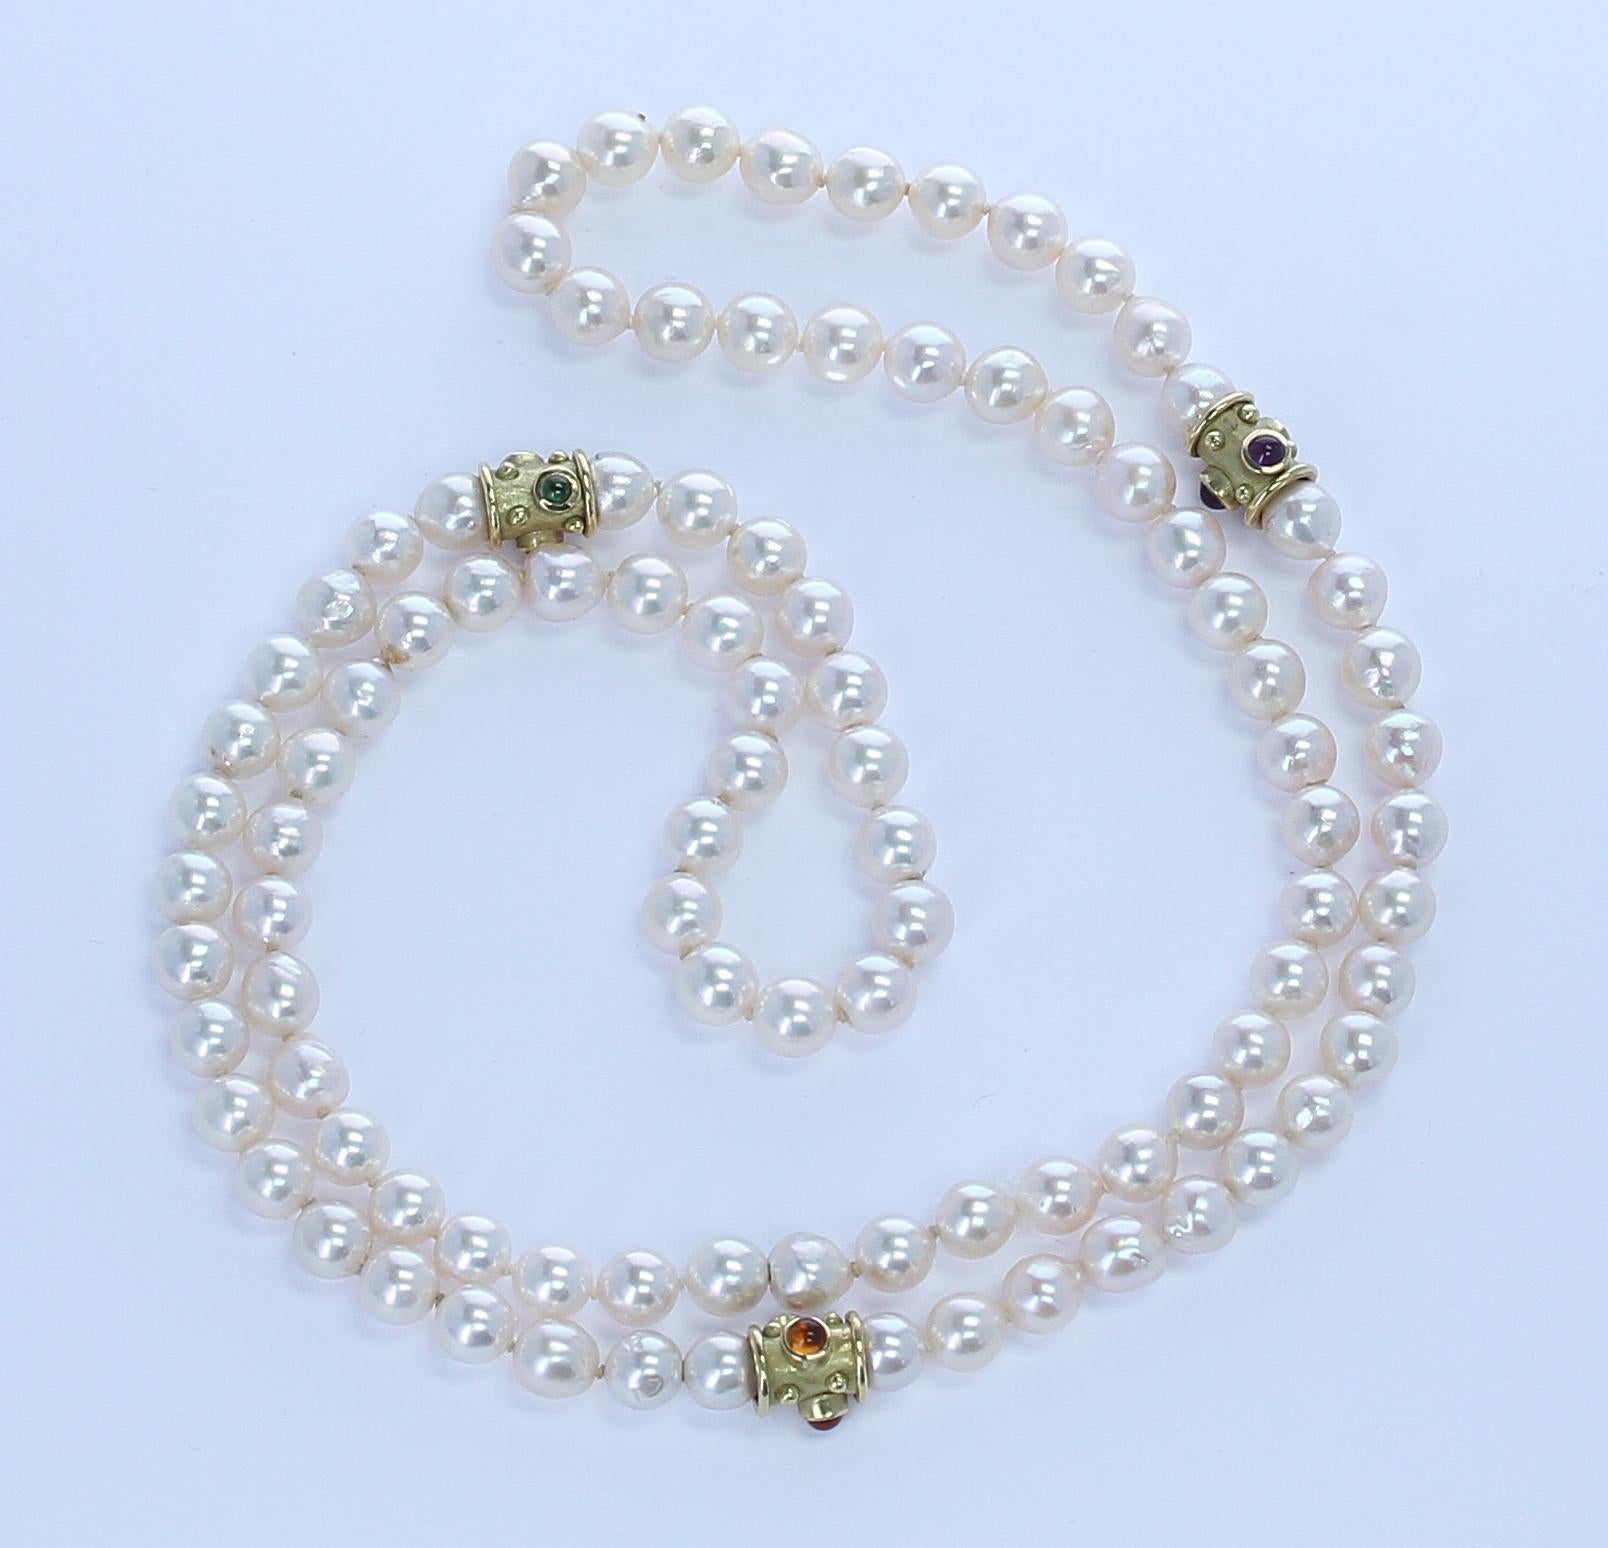 A classic strand of smooth cultured pearls with Gold and Semi-Precious Cabochon Spacers-Peridot, Citrine, Amethyst. Weight: 458 cts. Range: 8MM, Length: 34 inches